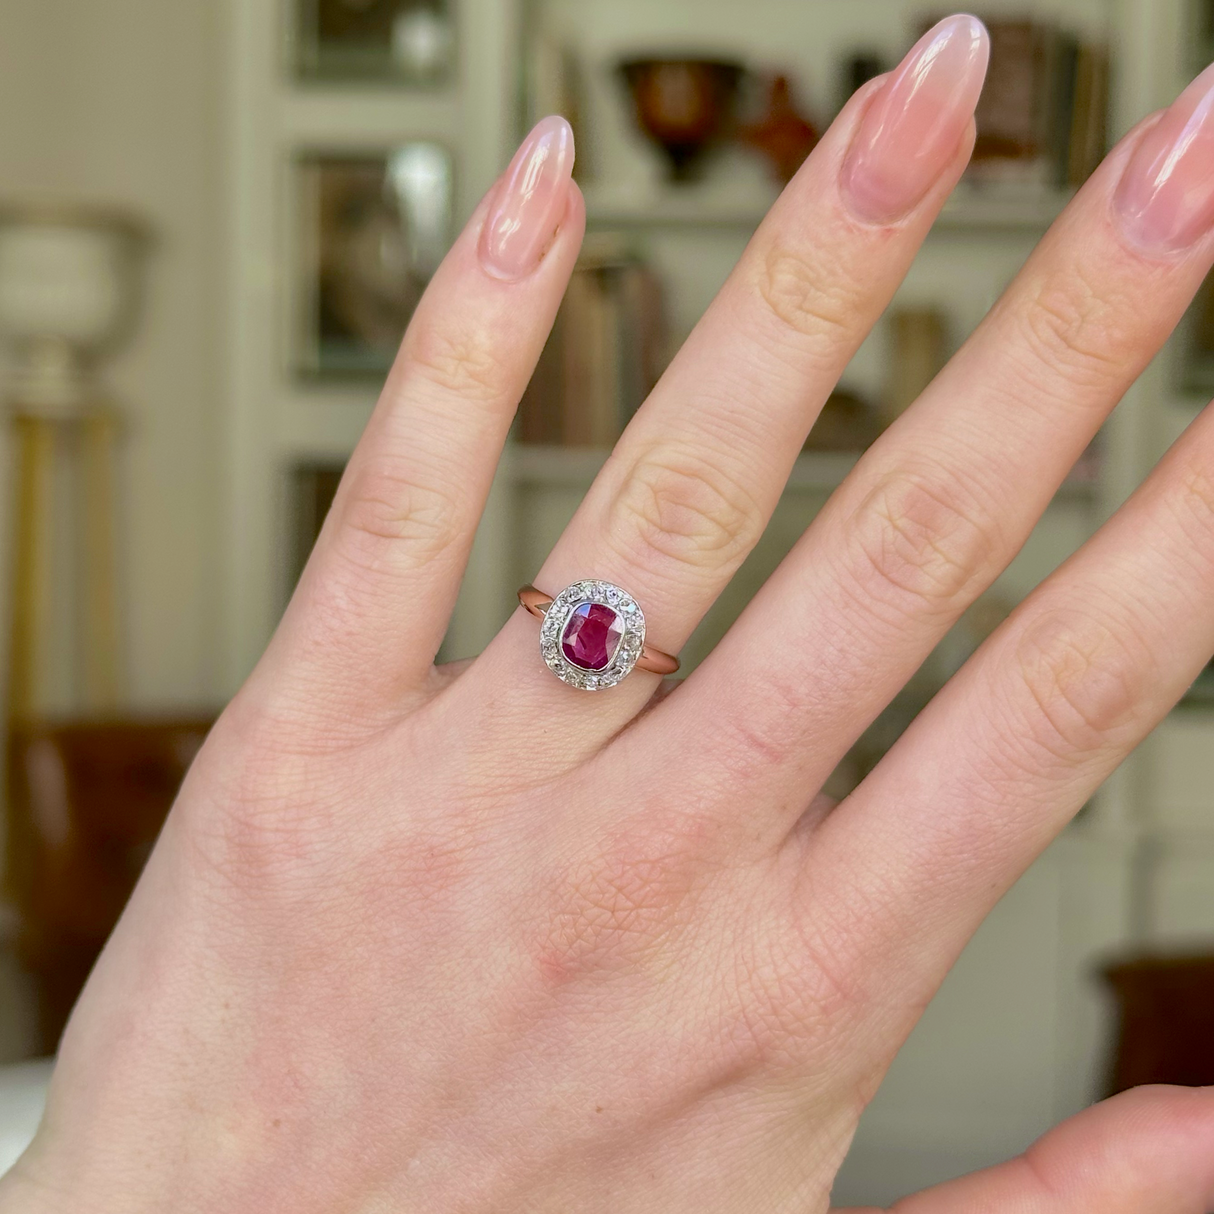 Antique, Edwardian Pink Sapphire and Diamond Cluster Ring, 18ct Yellow Gold and Platinum worn on hand.